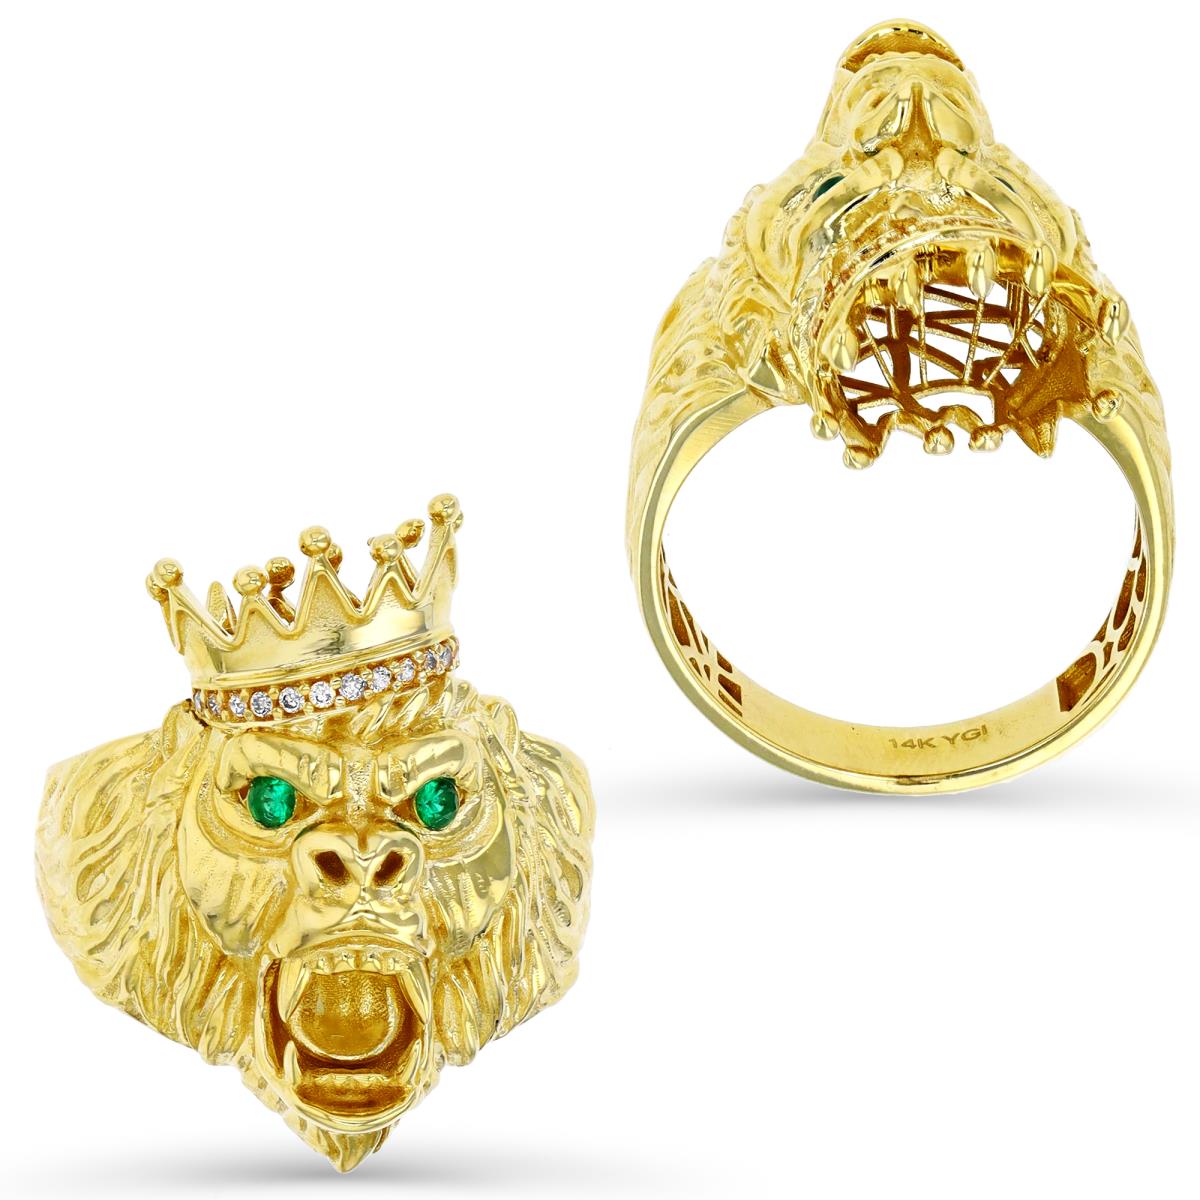 10K Gold Yellow 27MM Polished & Textured White & Green CZ King Lion Head Ring